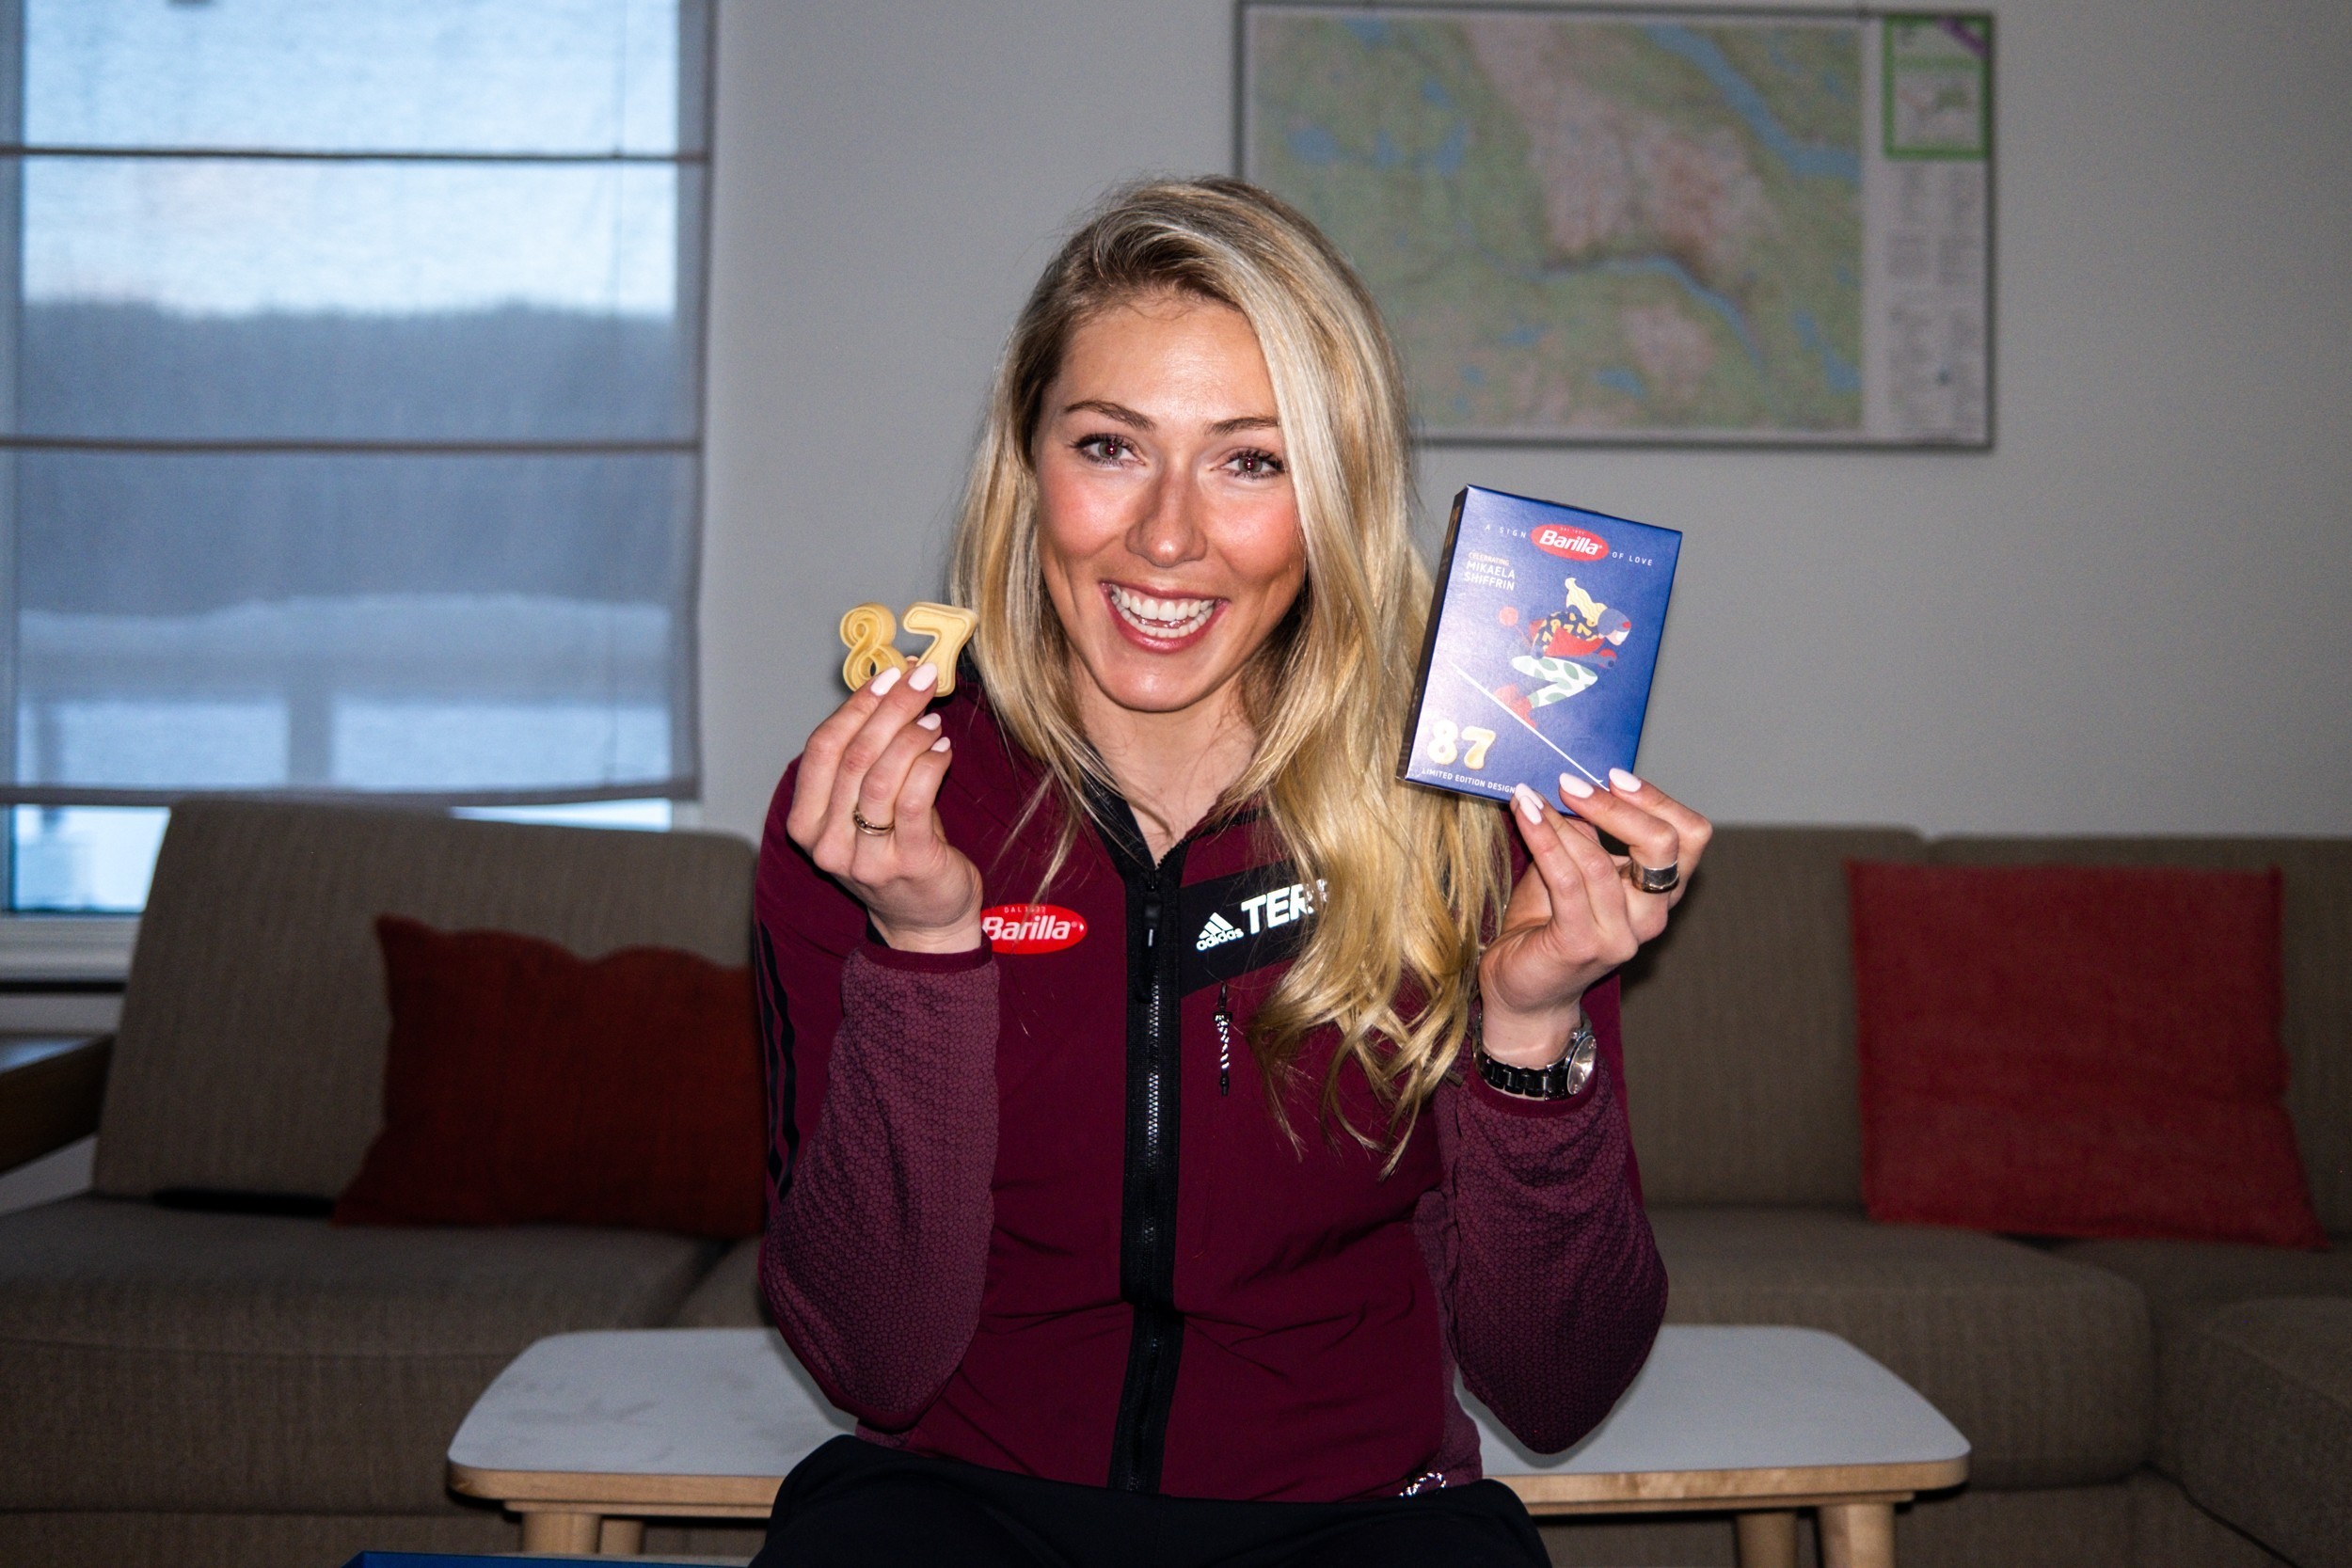 Barilla & Mikaela Shiffrin: Greatness starts with a great recipe - Pack No. 71